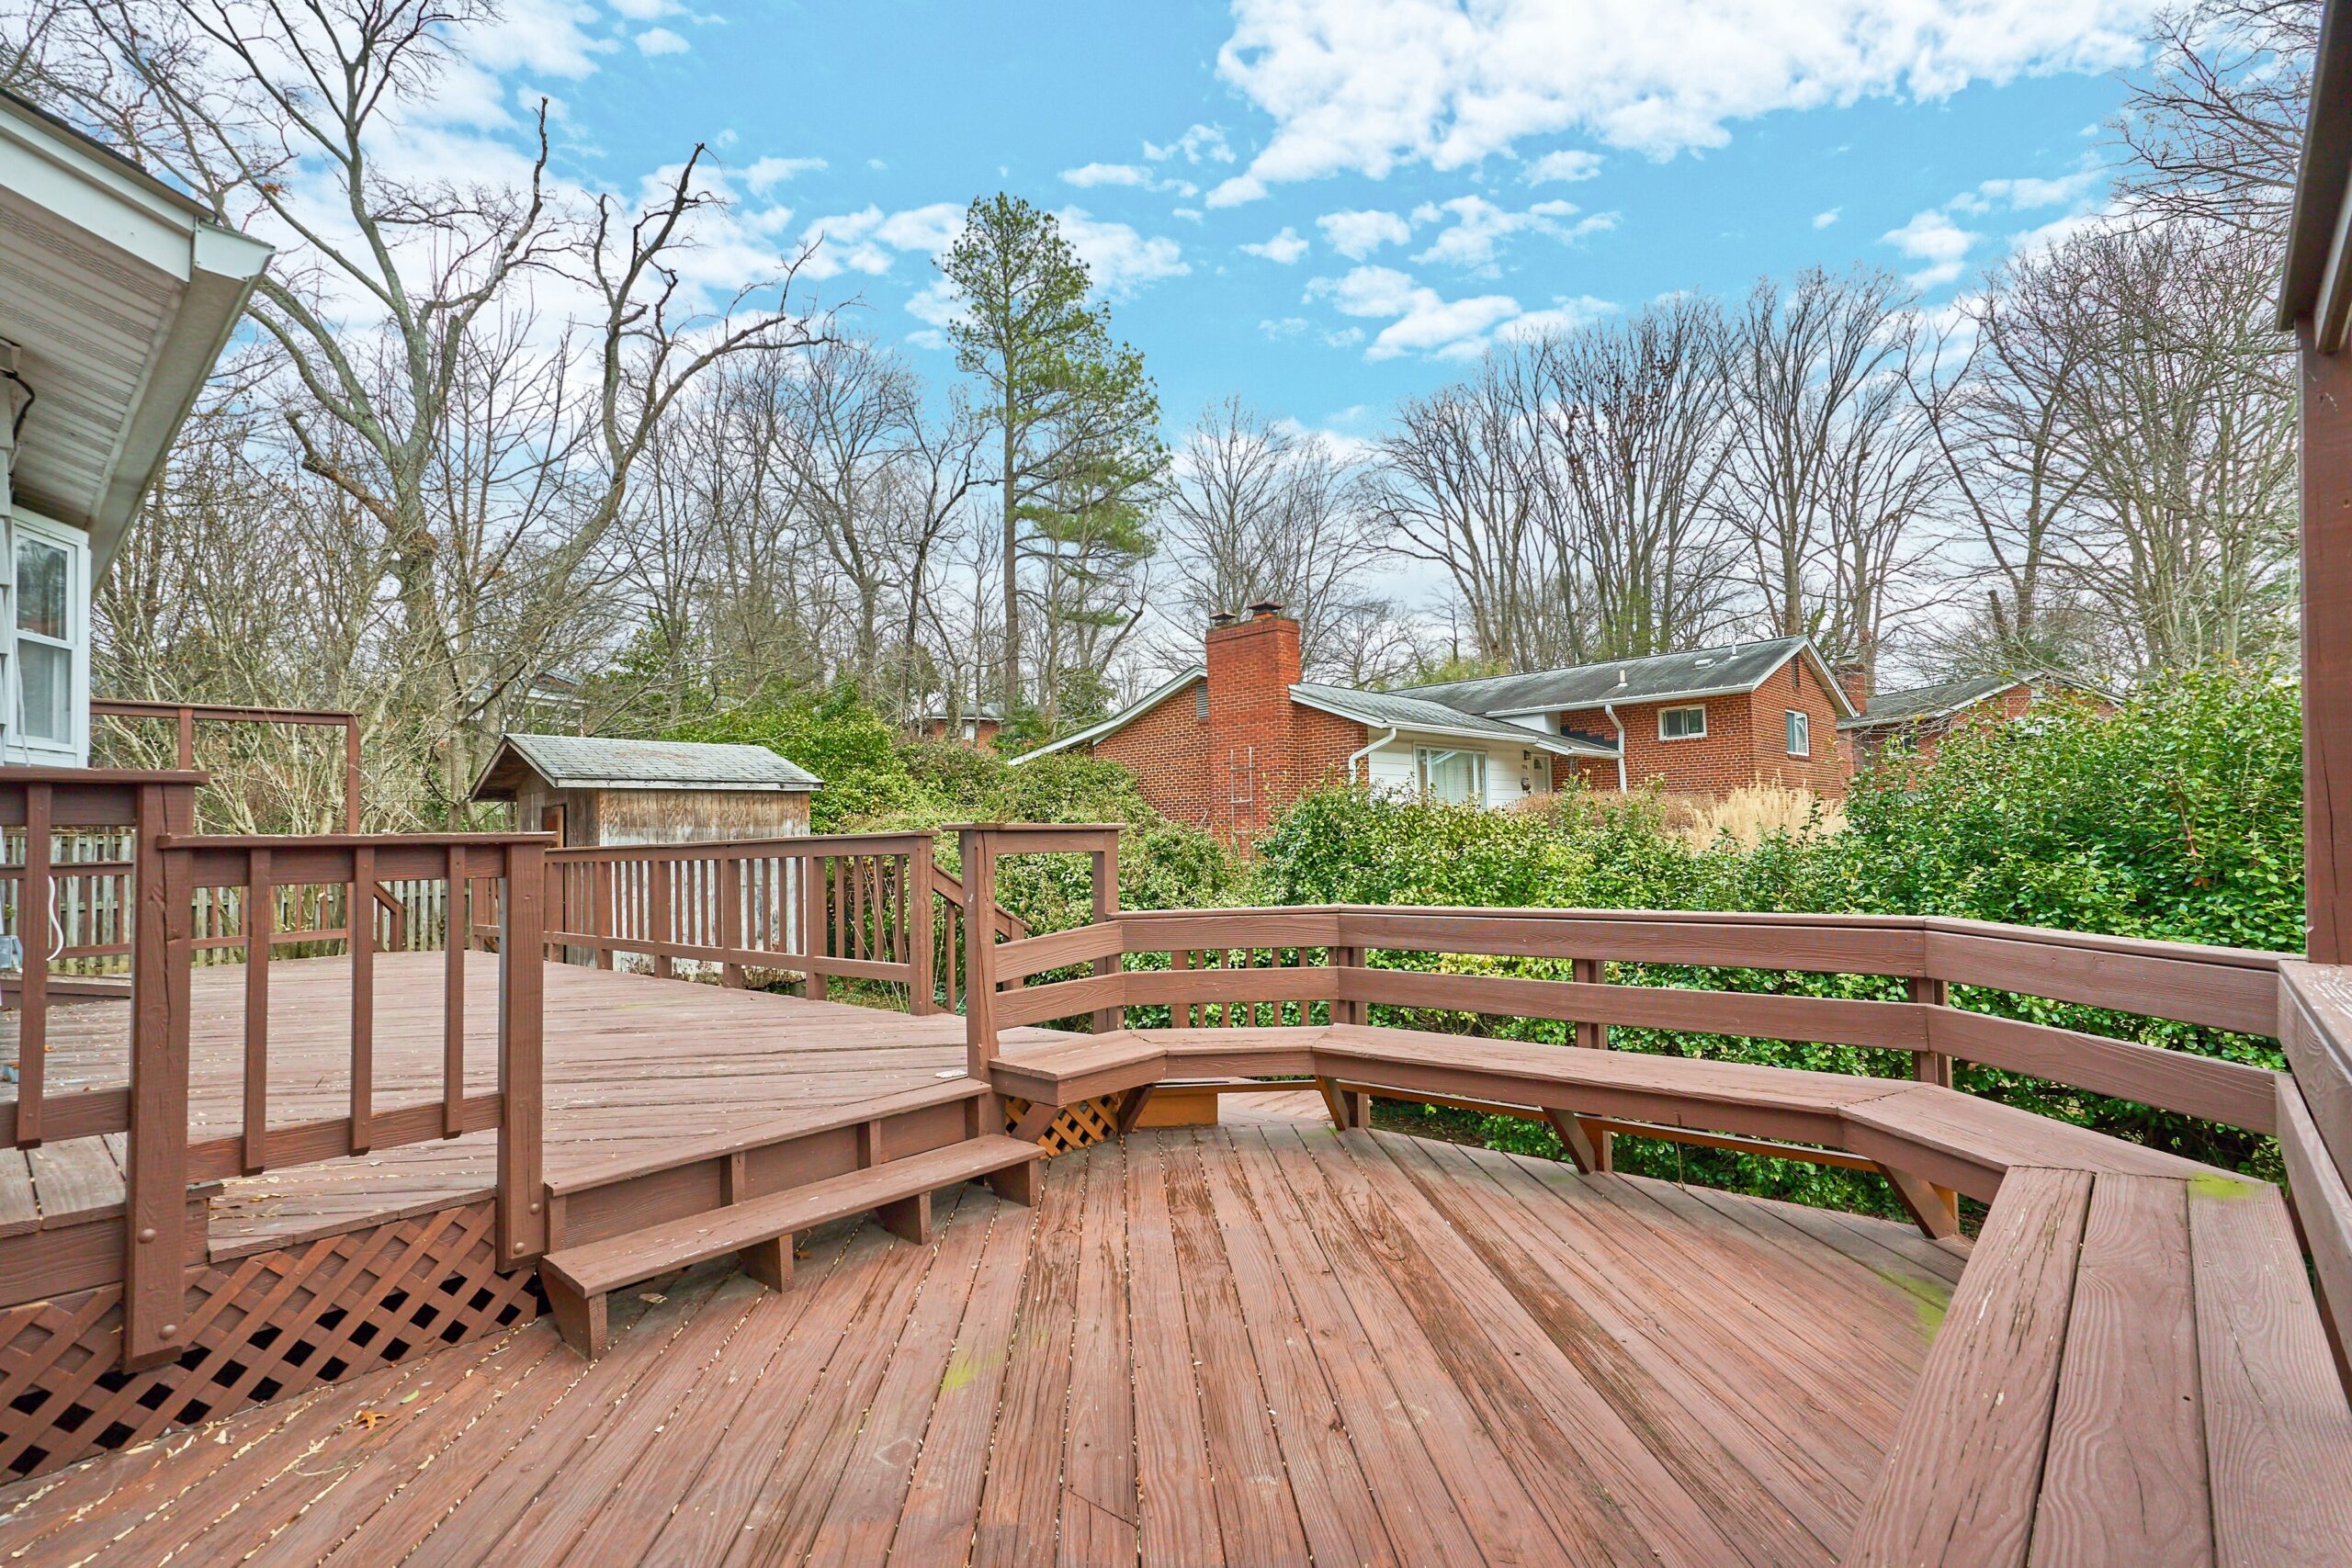 Professional exterior photo of 3482 Mildred Drive in Falls Church virginia, showing the rear deck with built-in wrap around bench